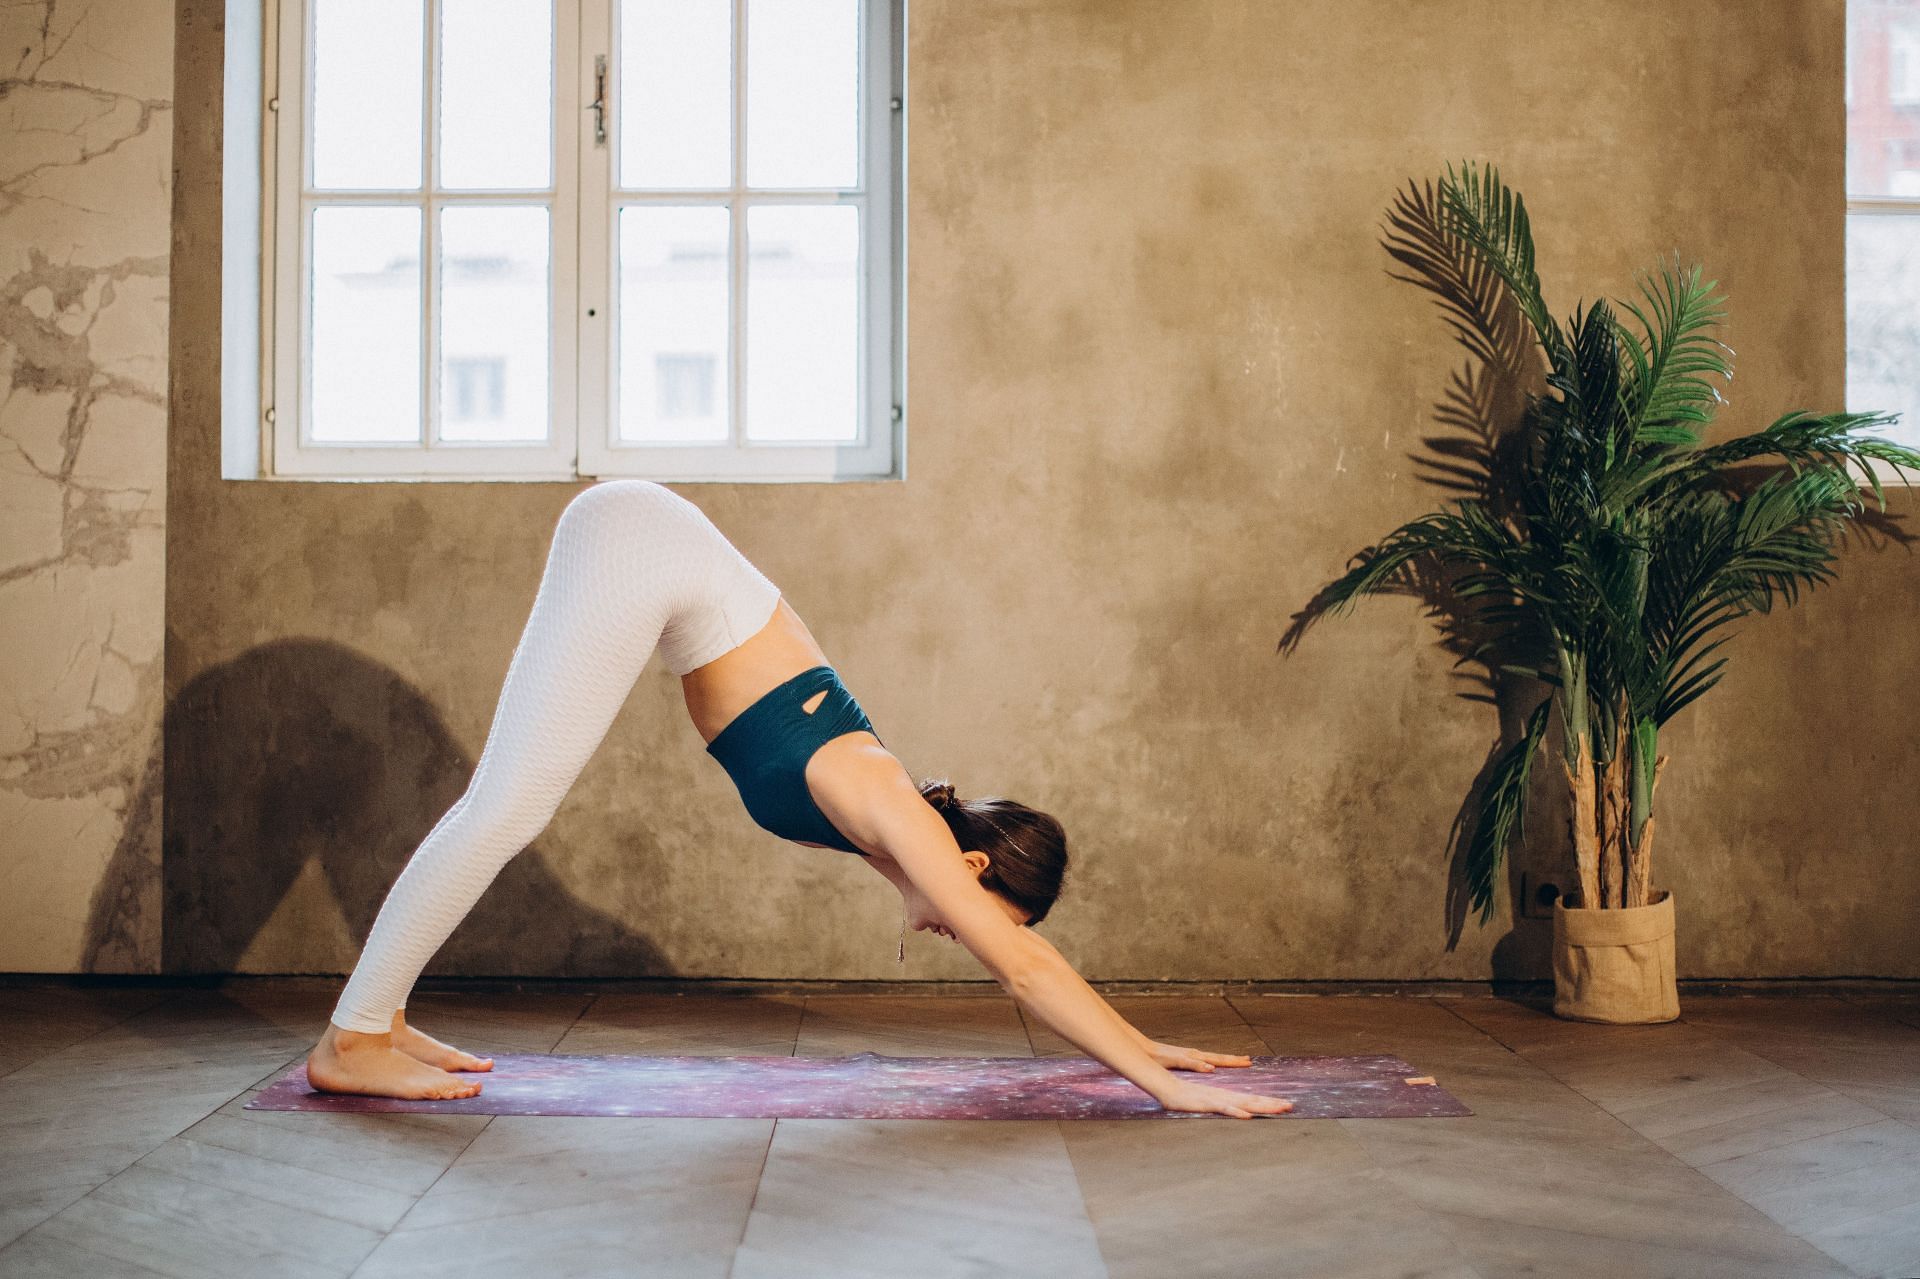 Downward facing dog is one of the best stretches for glutes and hamstrings (Image via Pexels @Elina Fairytale)